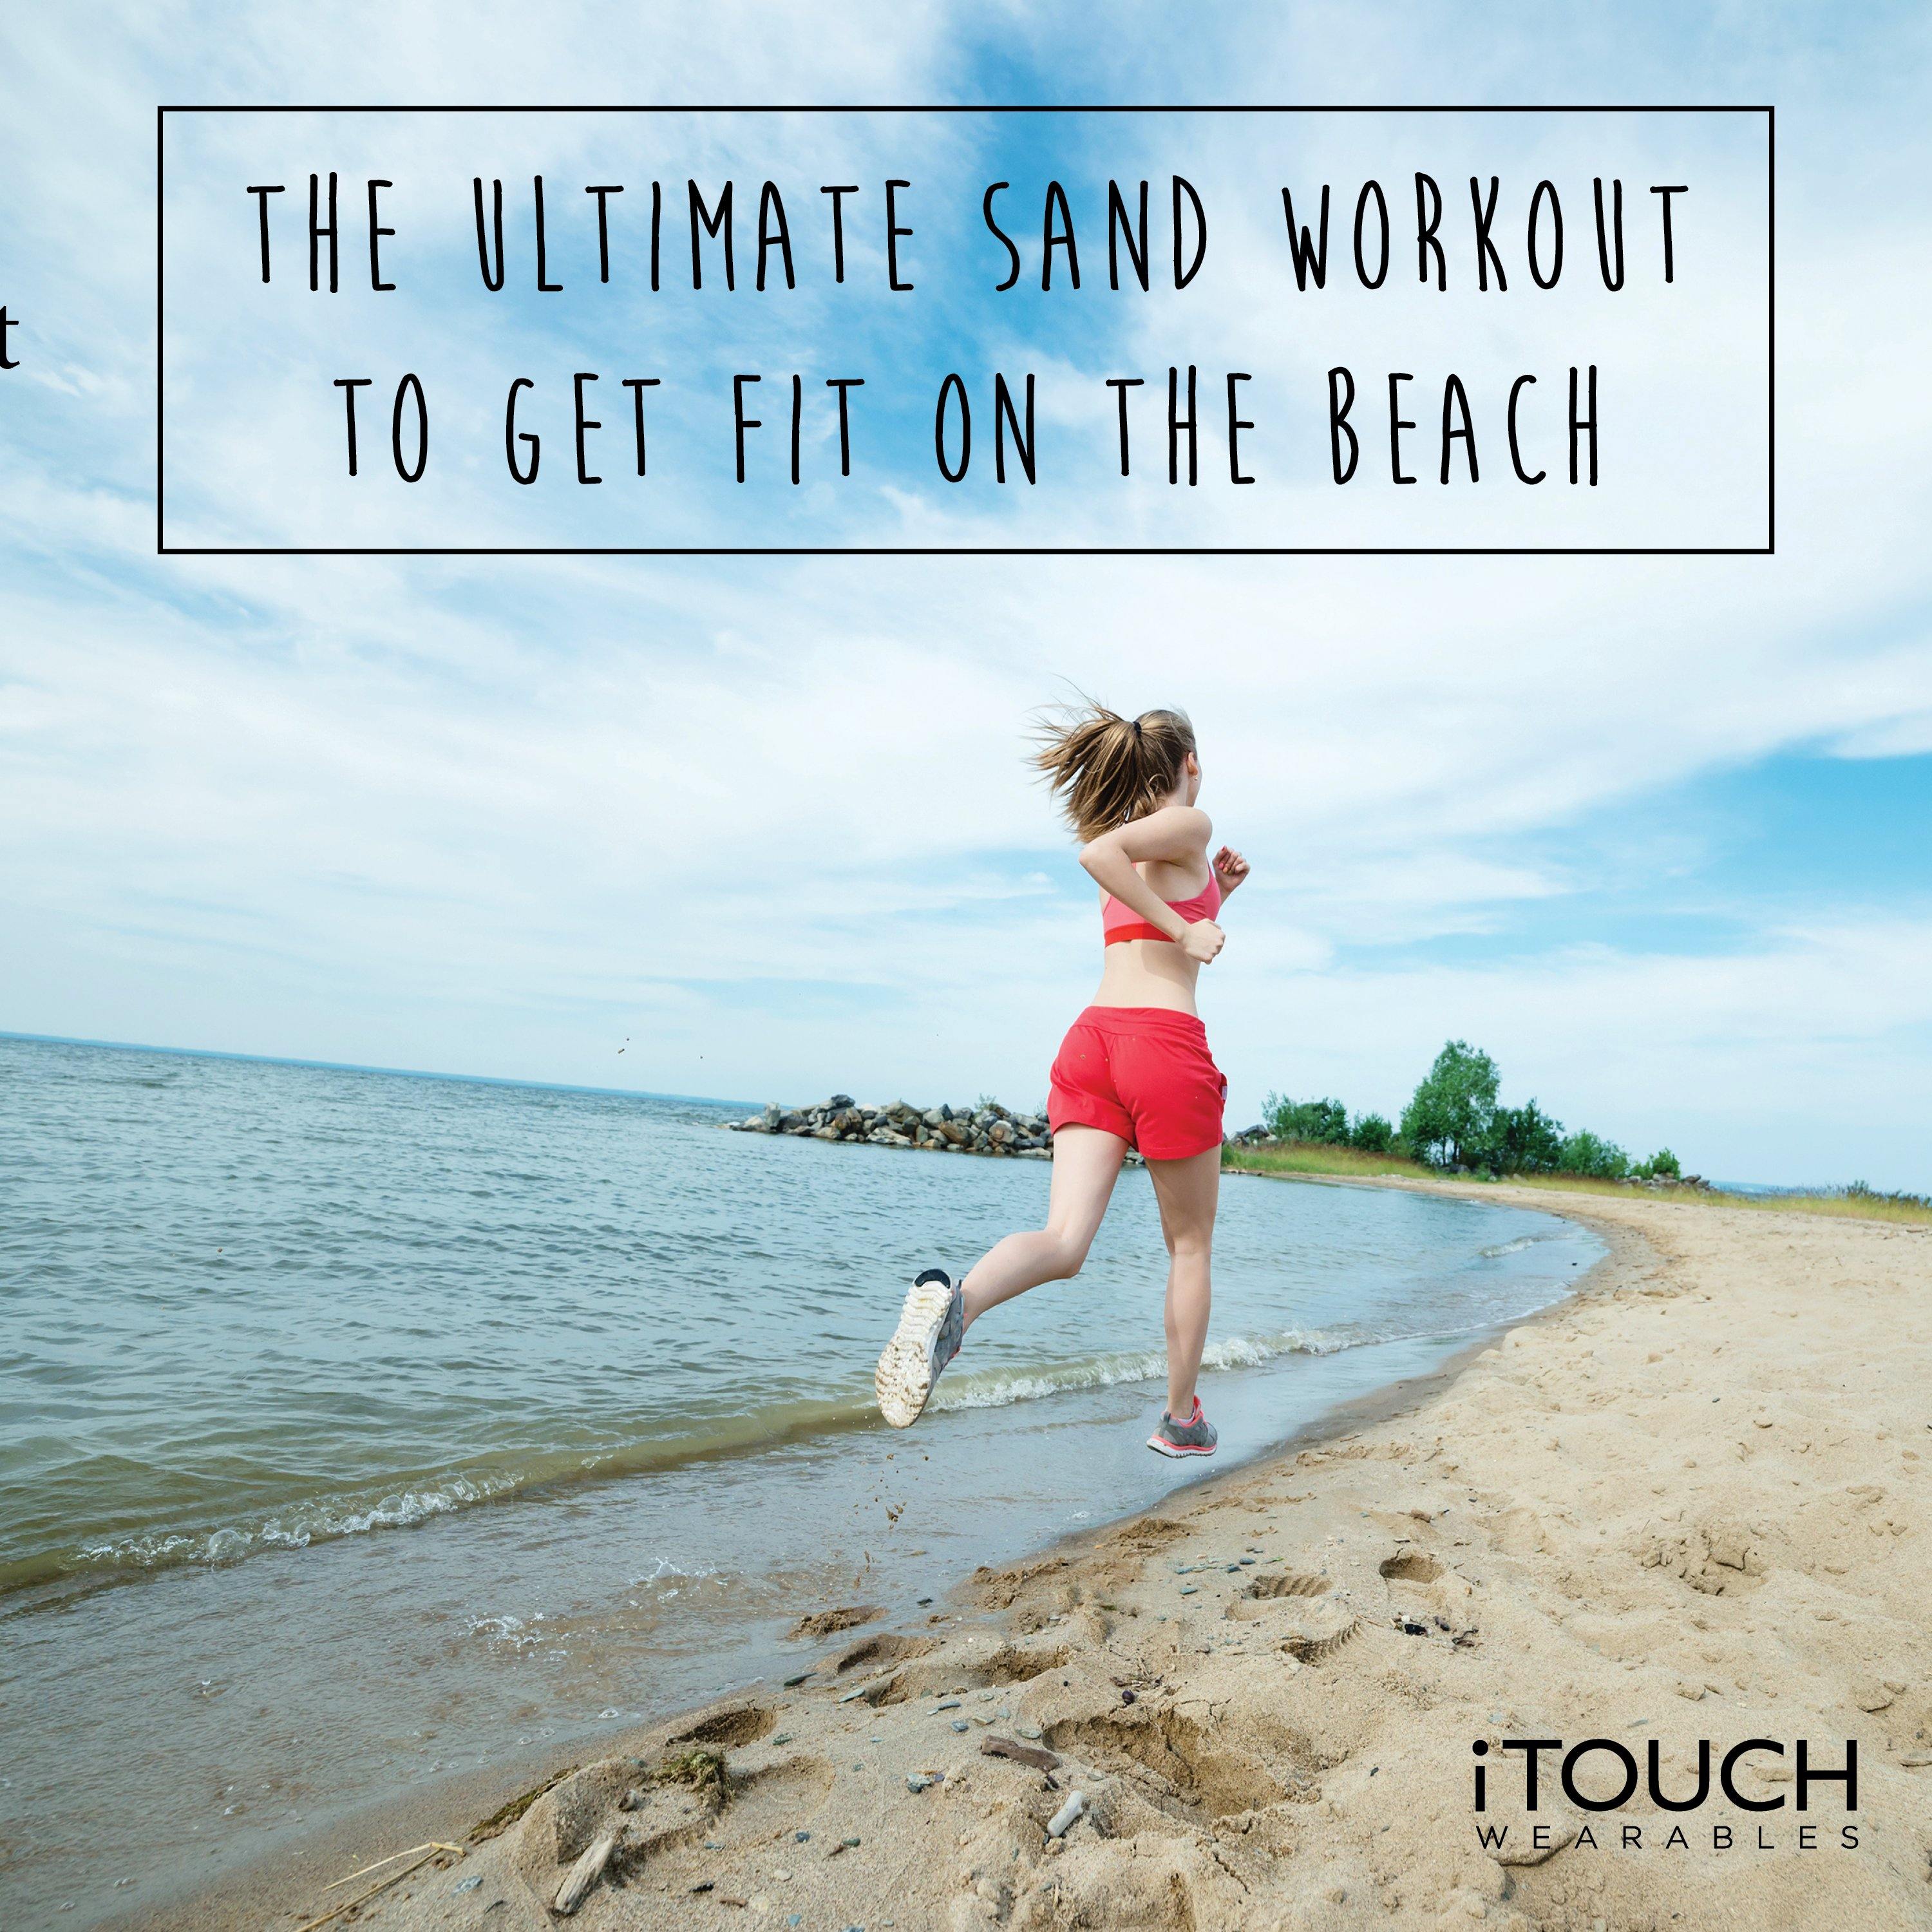 The Ultimate Sand Workout To Get Fit On The Beach - iTOUCH Wearables